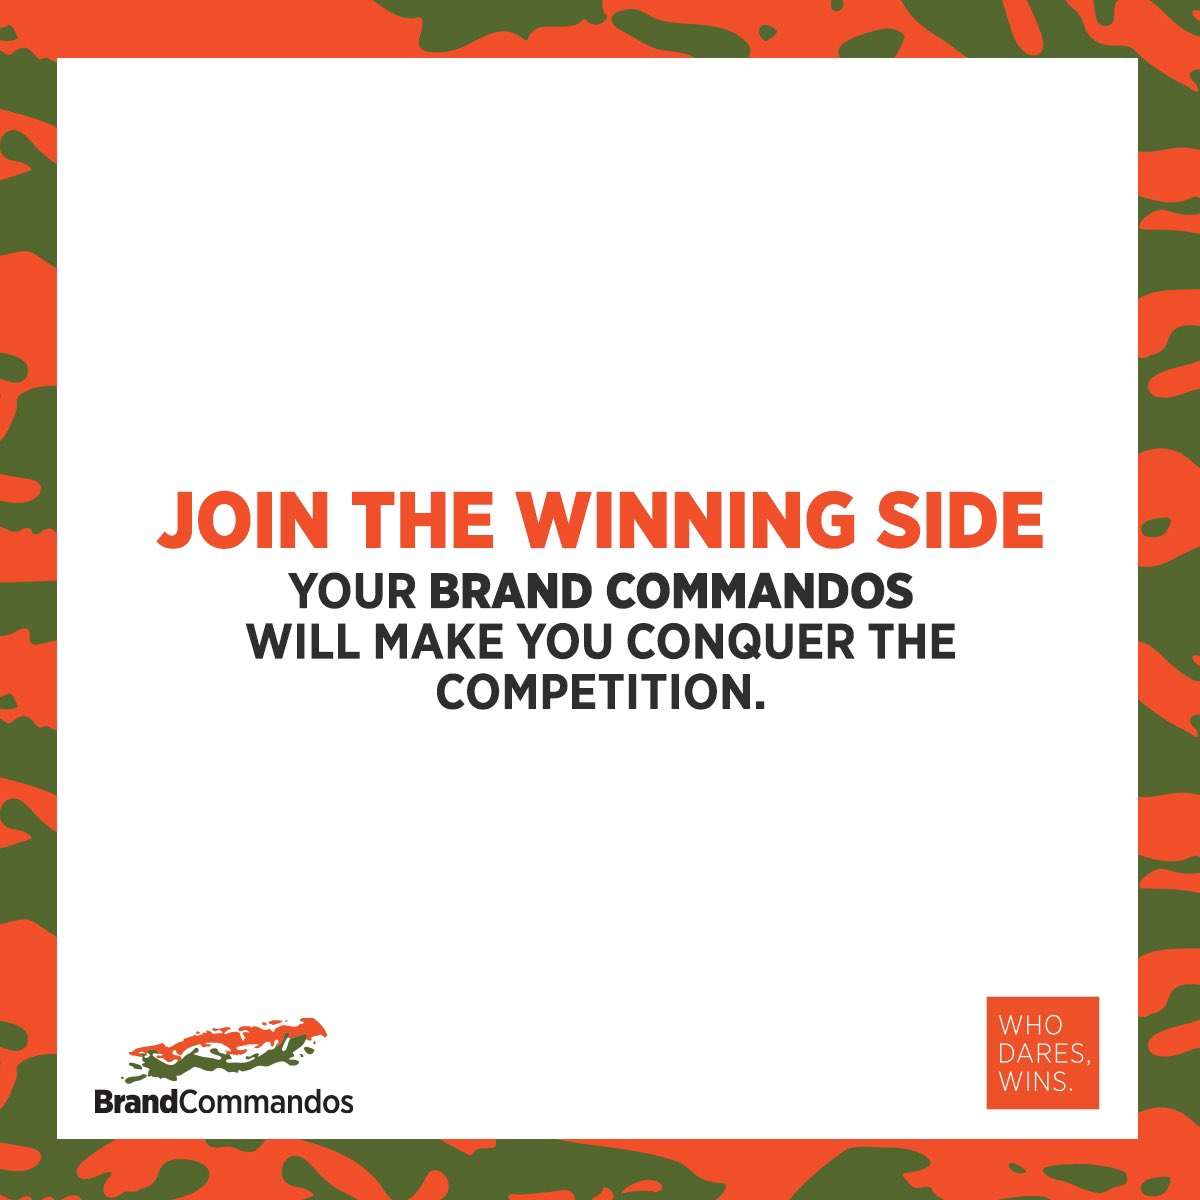 Ready to experience #EventManagement at its finest?

Join forces with #BrandCommandos and witness the power of seamless coordination and unparalleled professionalism. 
Don't settle for ordinary when extraordinary is just a call away.

Brand Commandos | Who dares wins